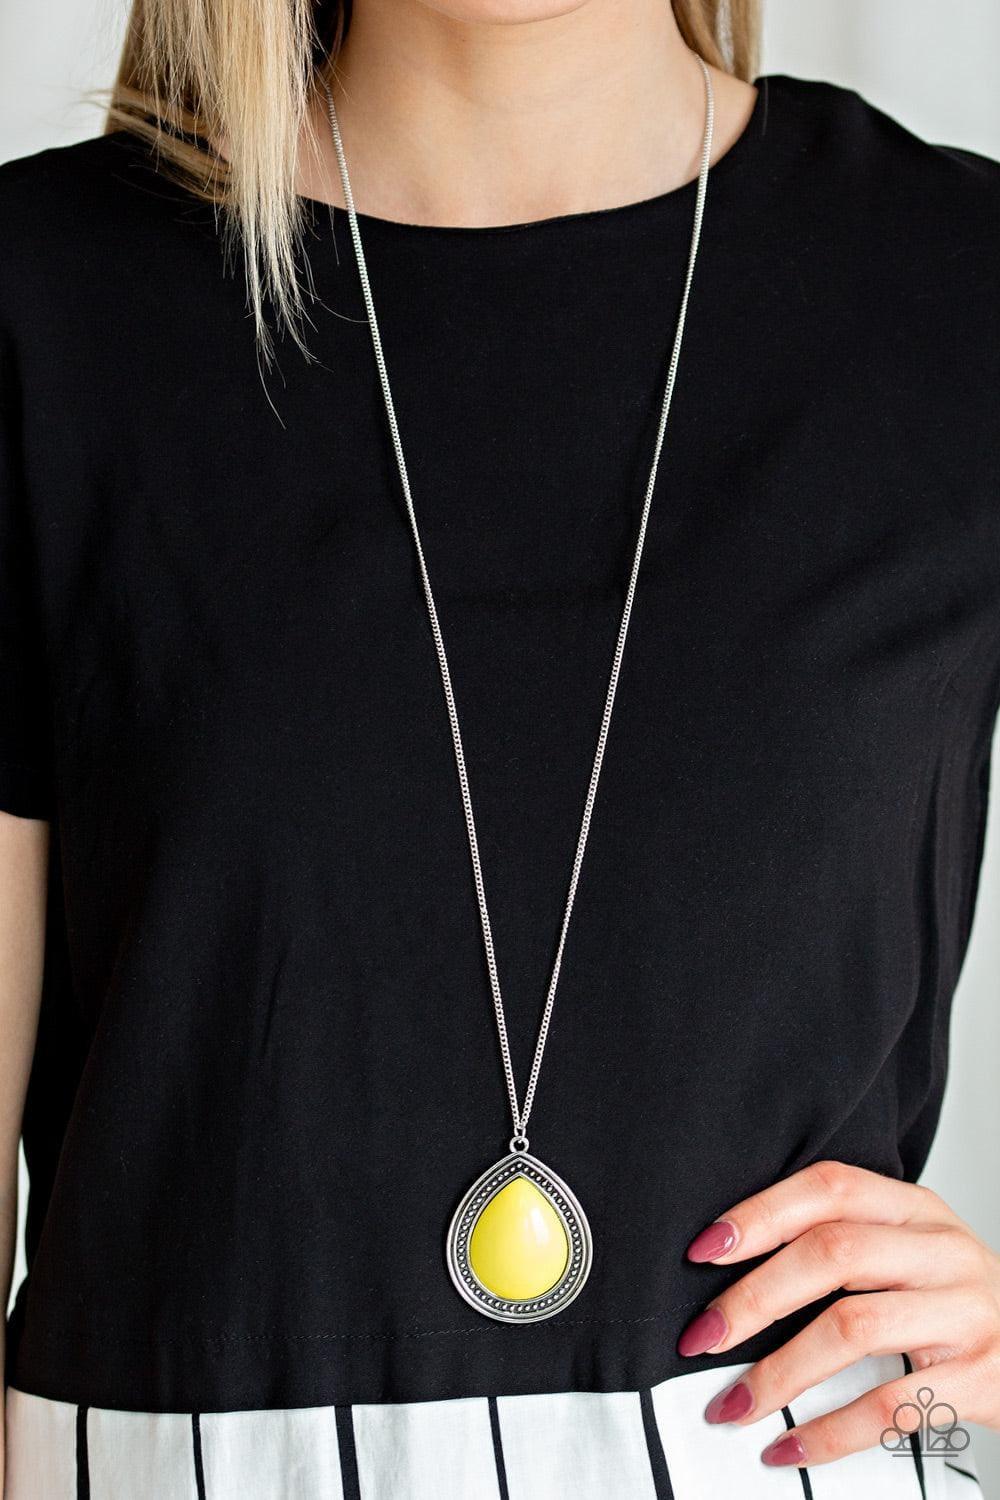 Paparazzi Accessories - Chroma Courageous - Yellow Necklace - Bling by JessieK